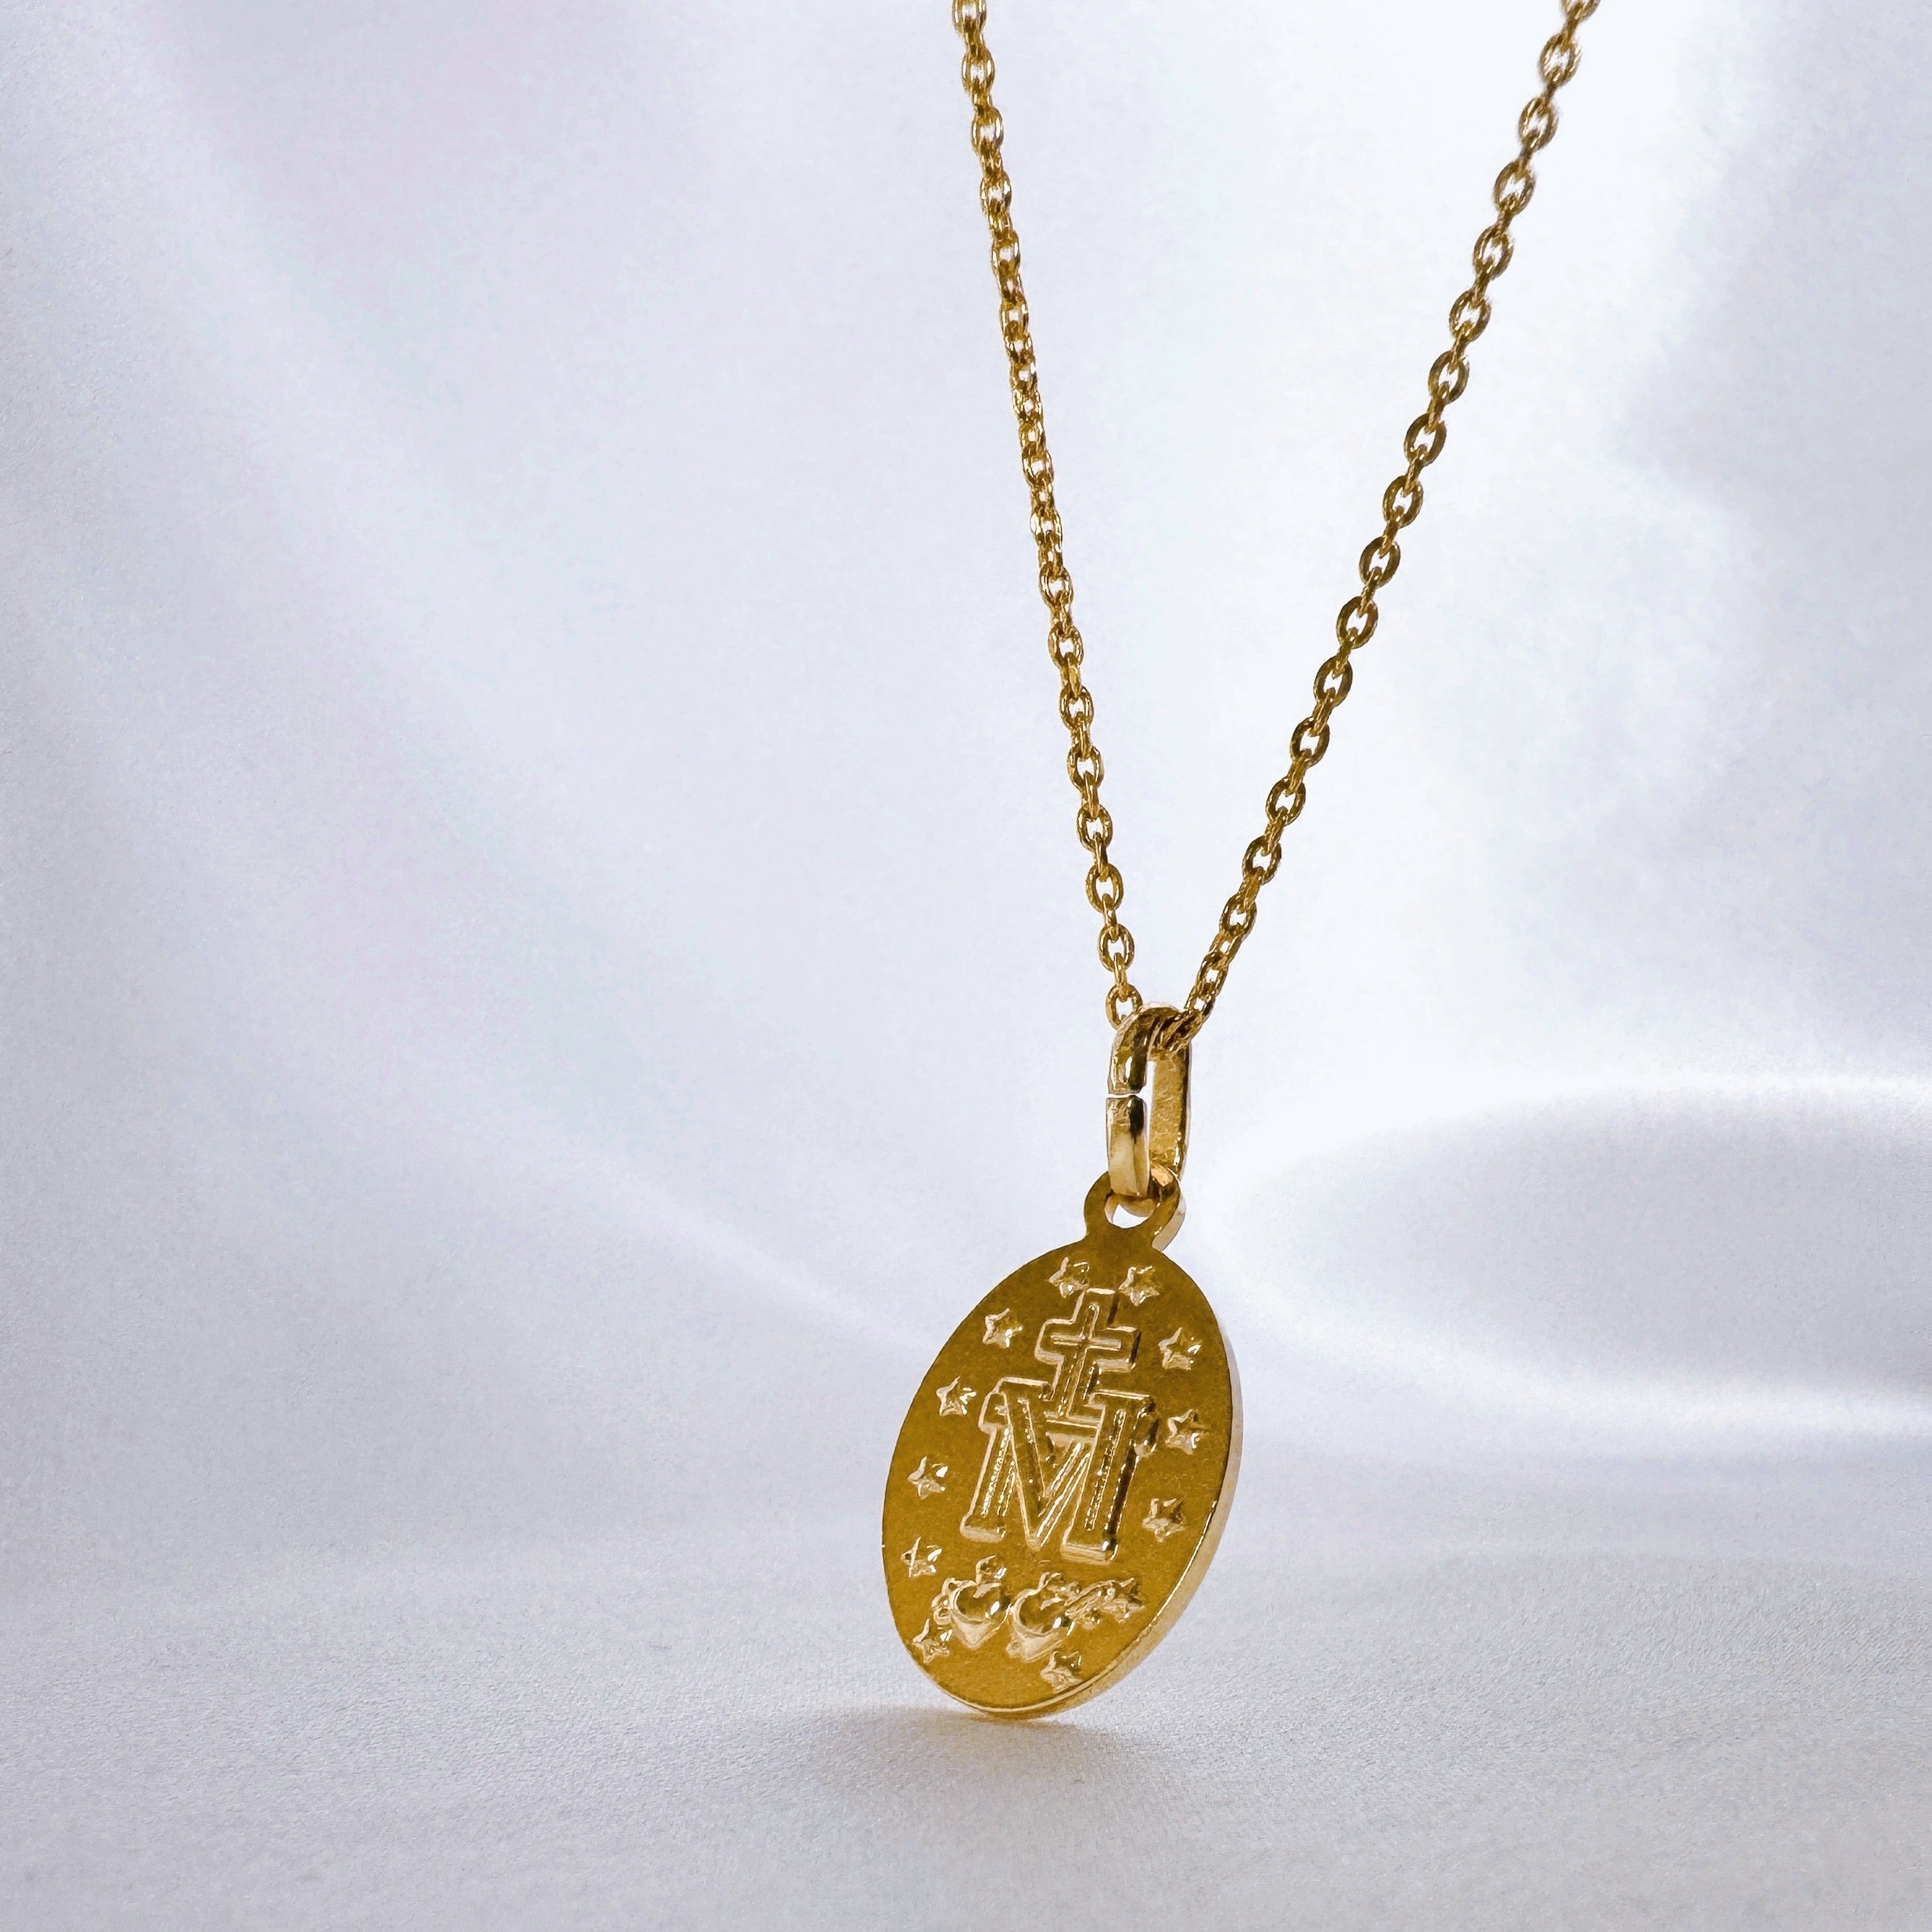 Gold-plated “Miraculous Virgin” necklace